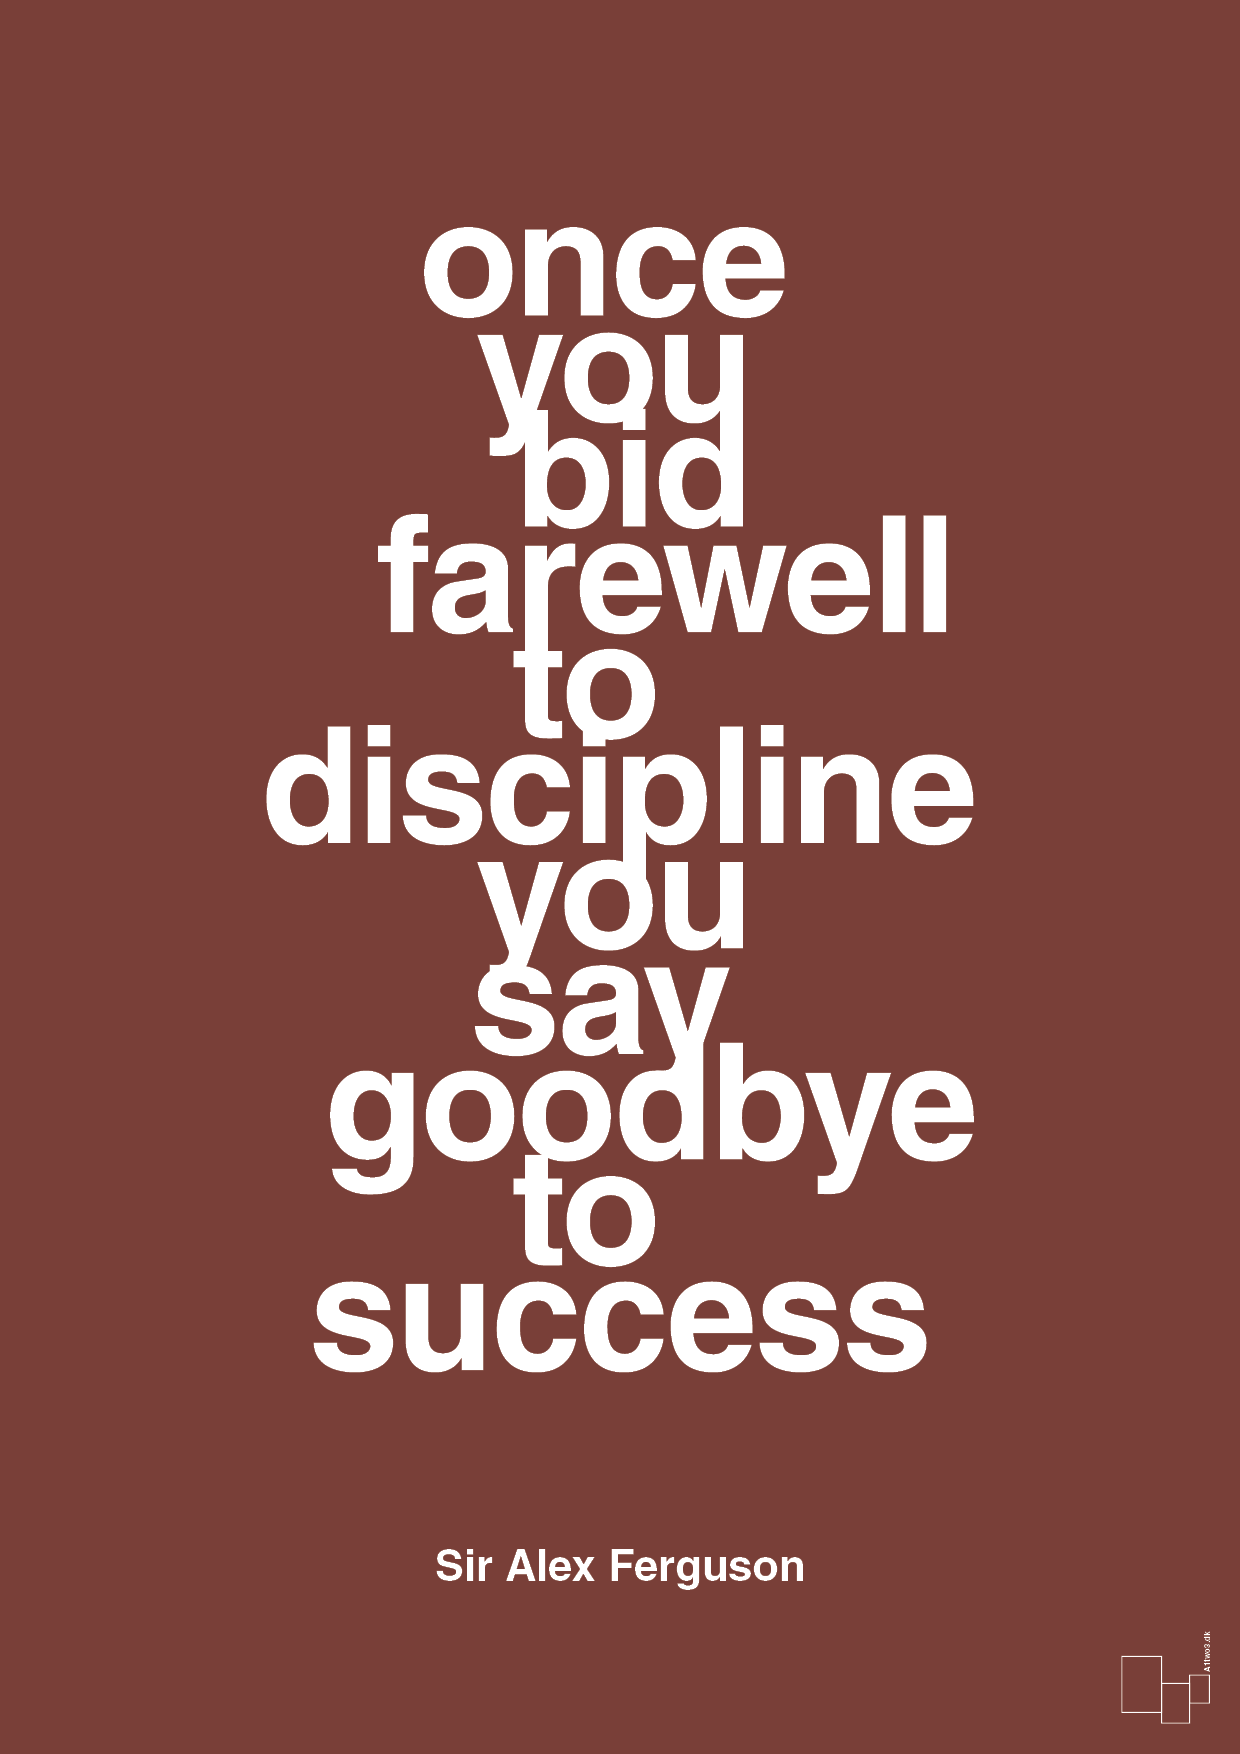 once you bid farewell to discipline you say goodbye to success - Plakat med Citater i Red Pepper